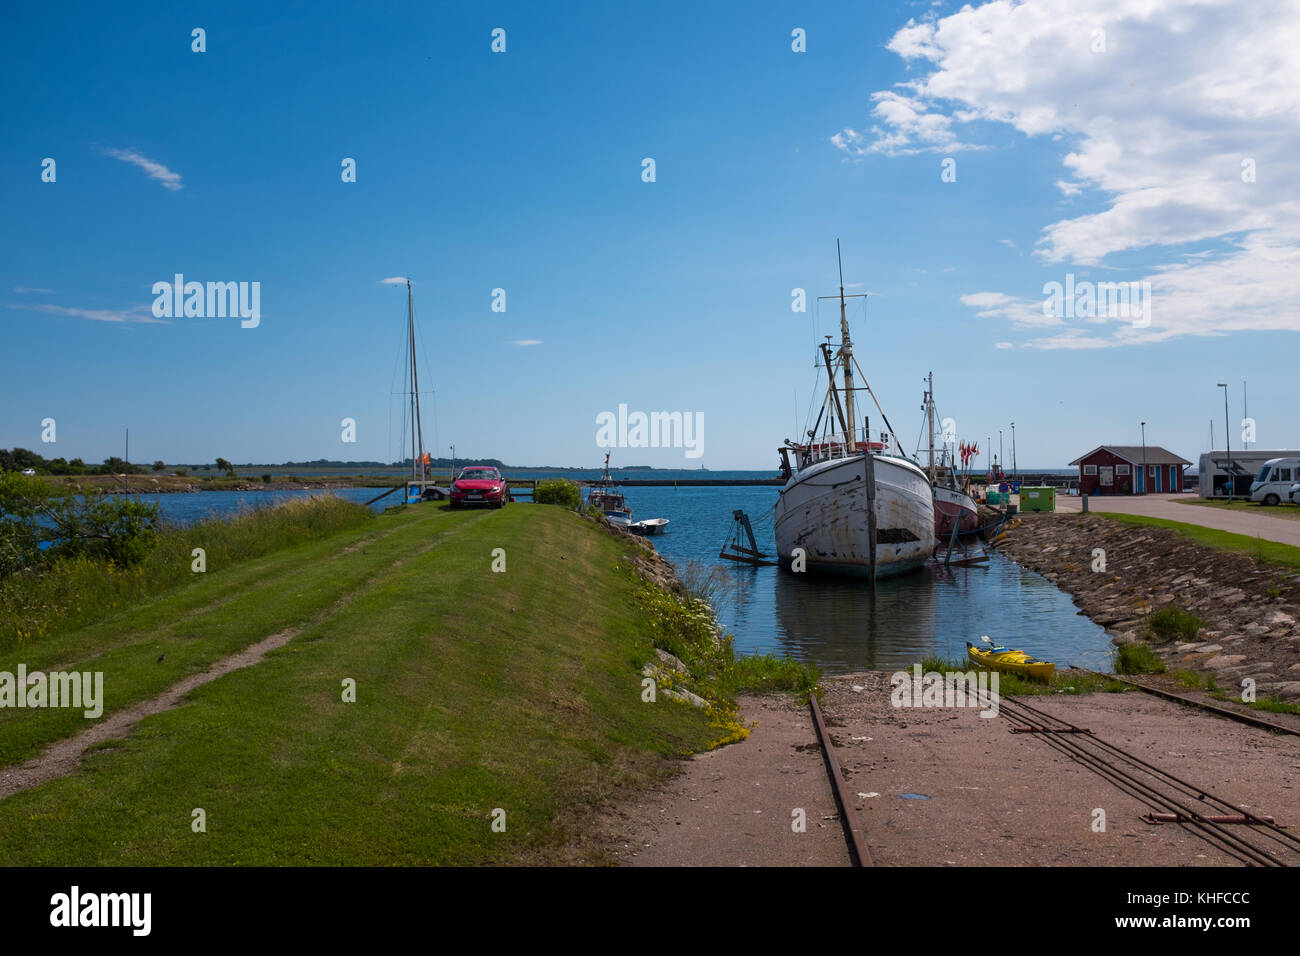 Calm smalltown fishing harbor in southern Sweden Stock Photo